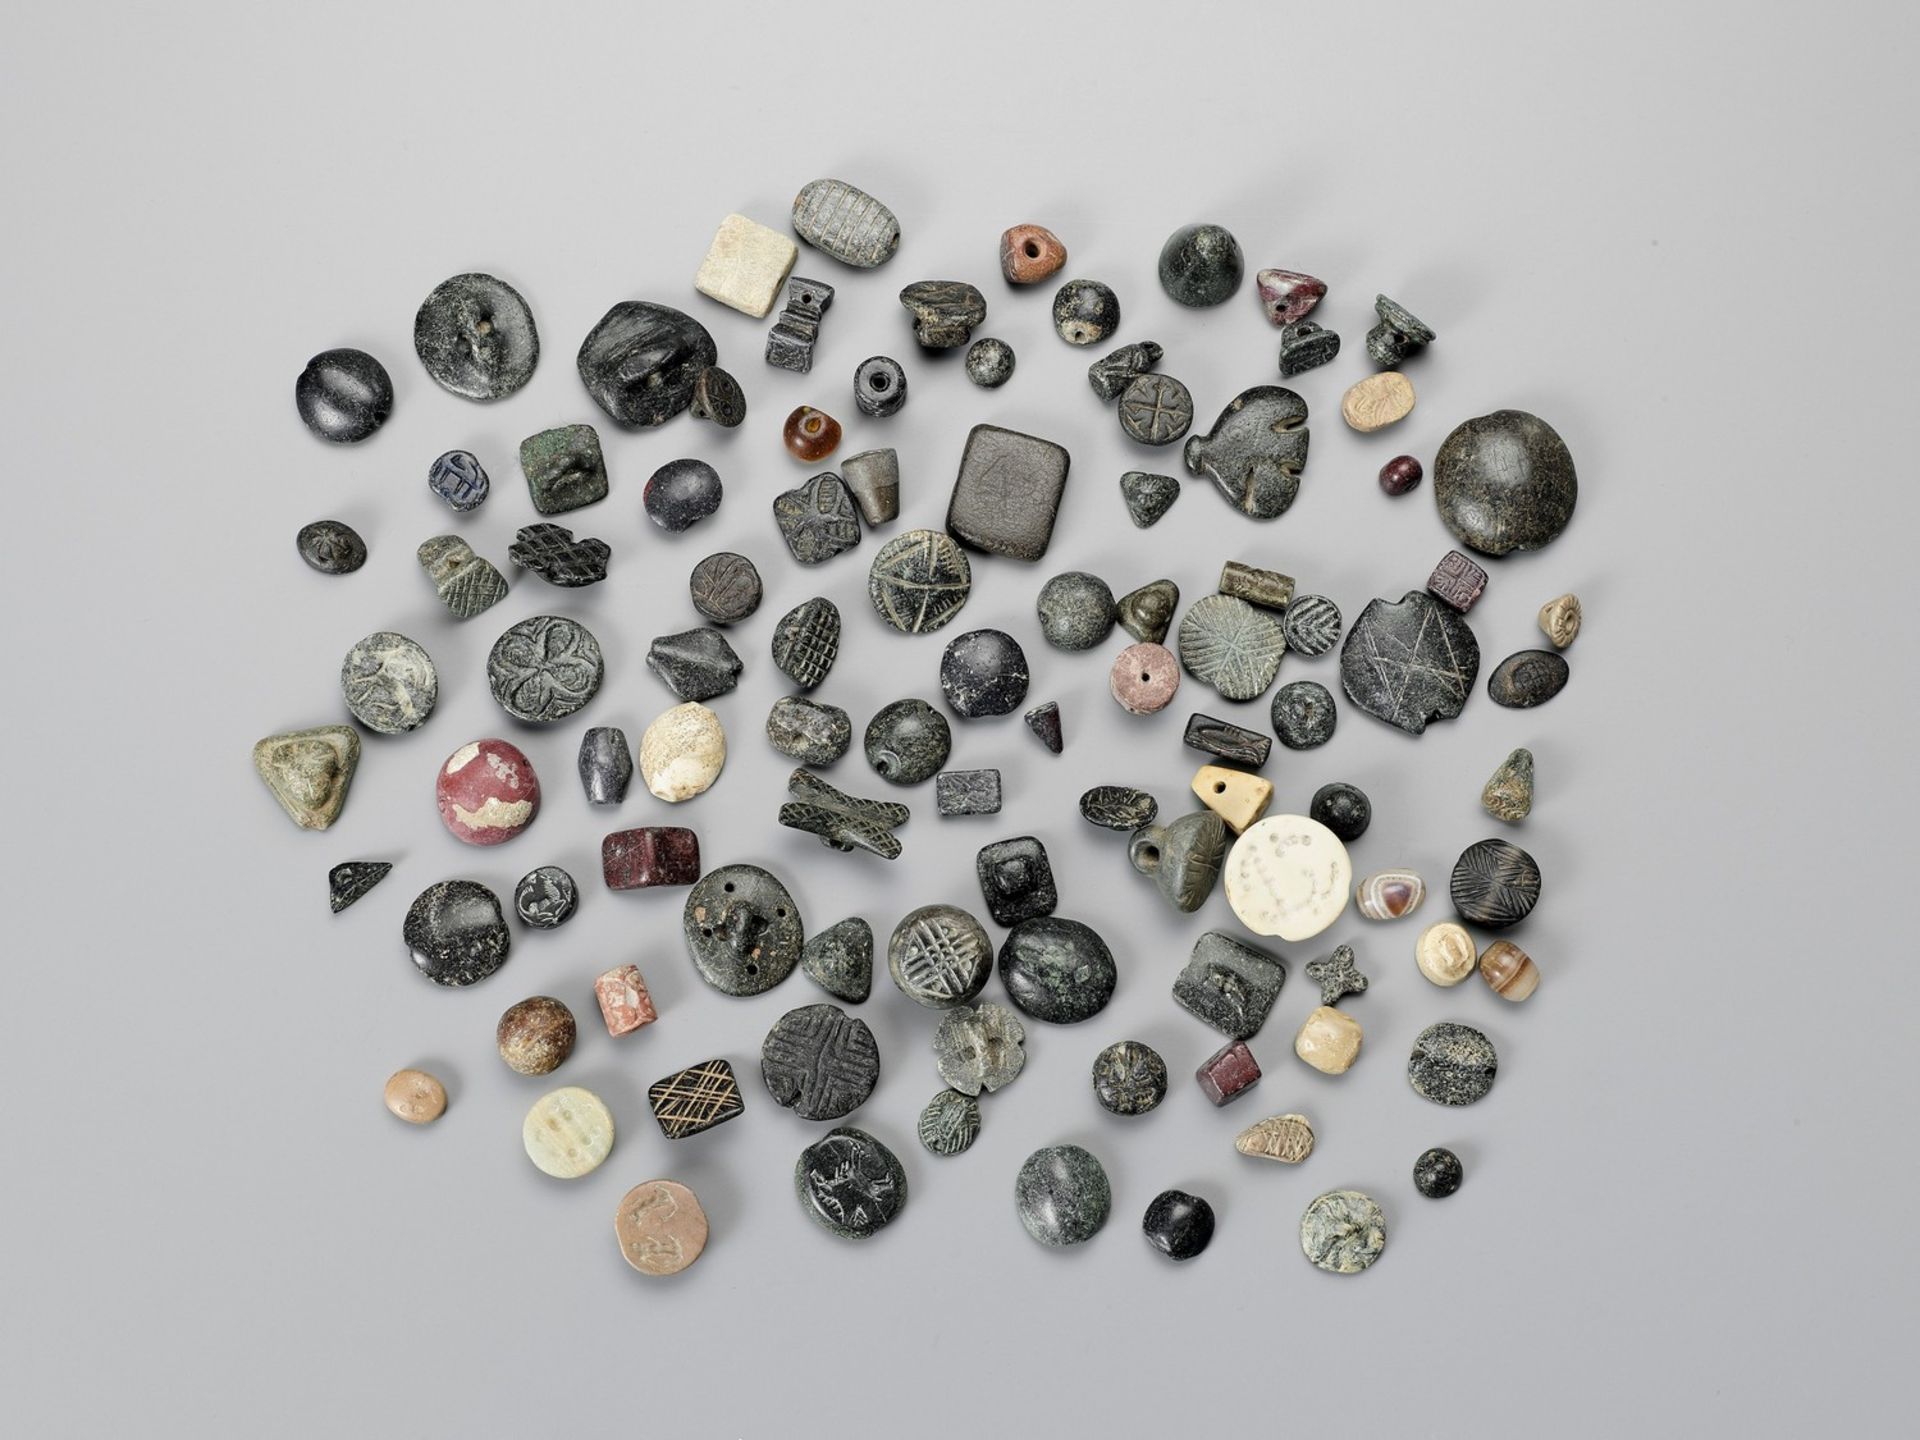 AN AMAZING COLLECTION OF 101!!! NEAR EAST ANCIENT SEALS AND BEADS - Bild 4 aus 4